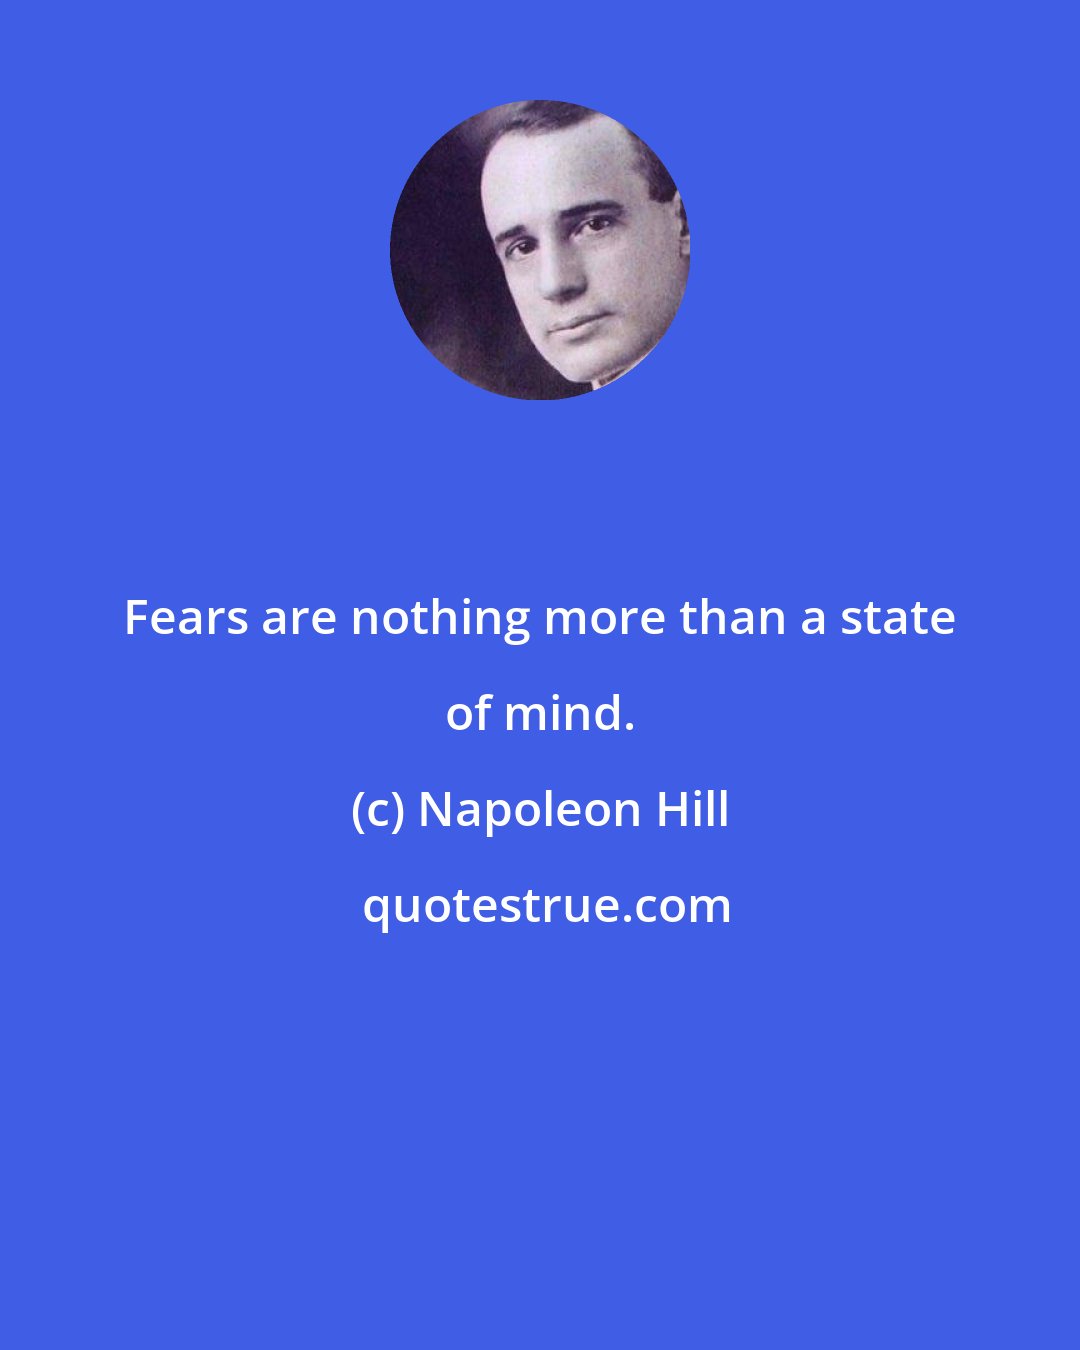 Napoleon Hill: Fears are nothing more than a state of mind.